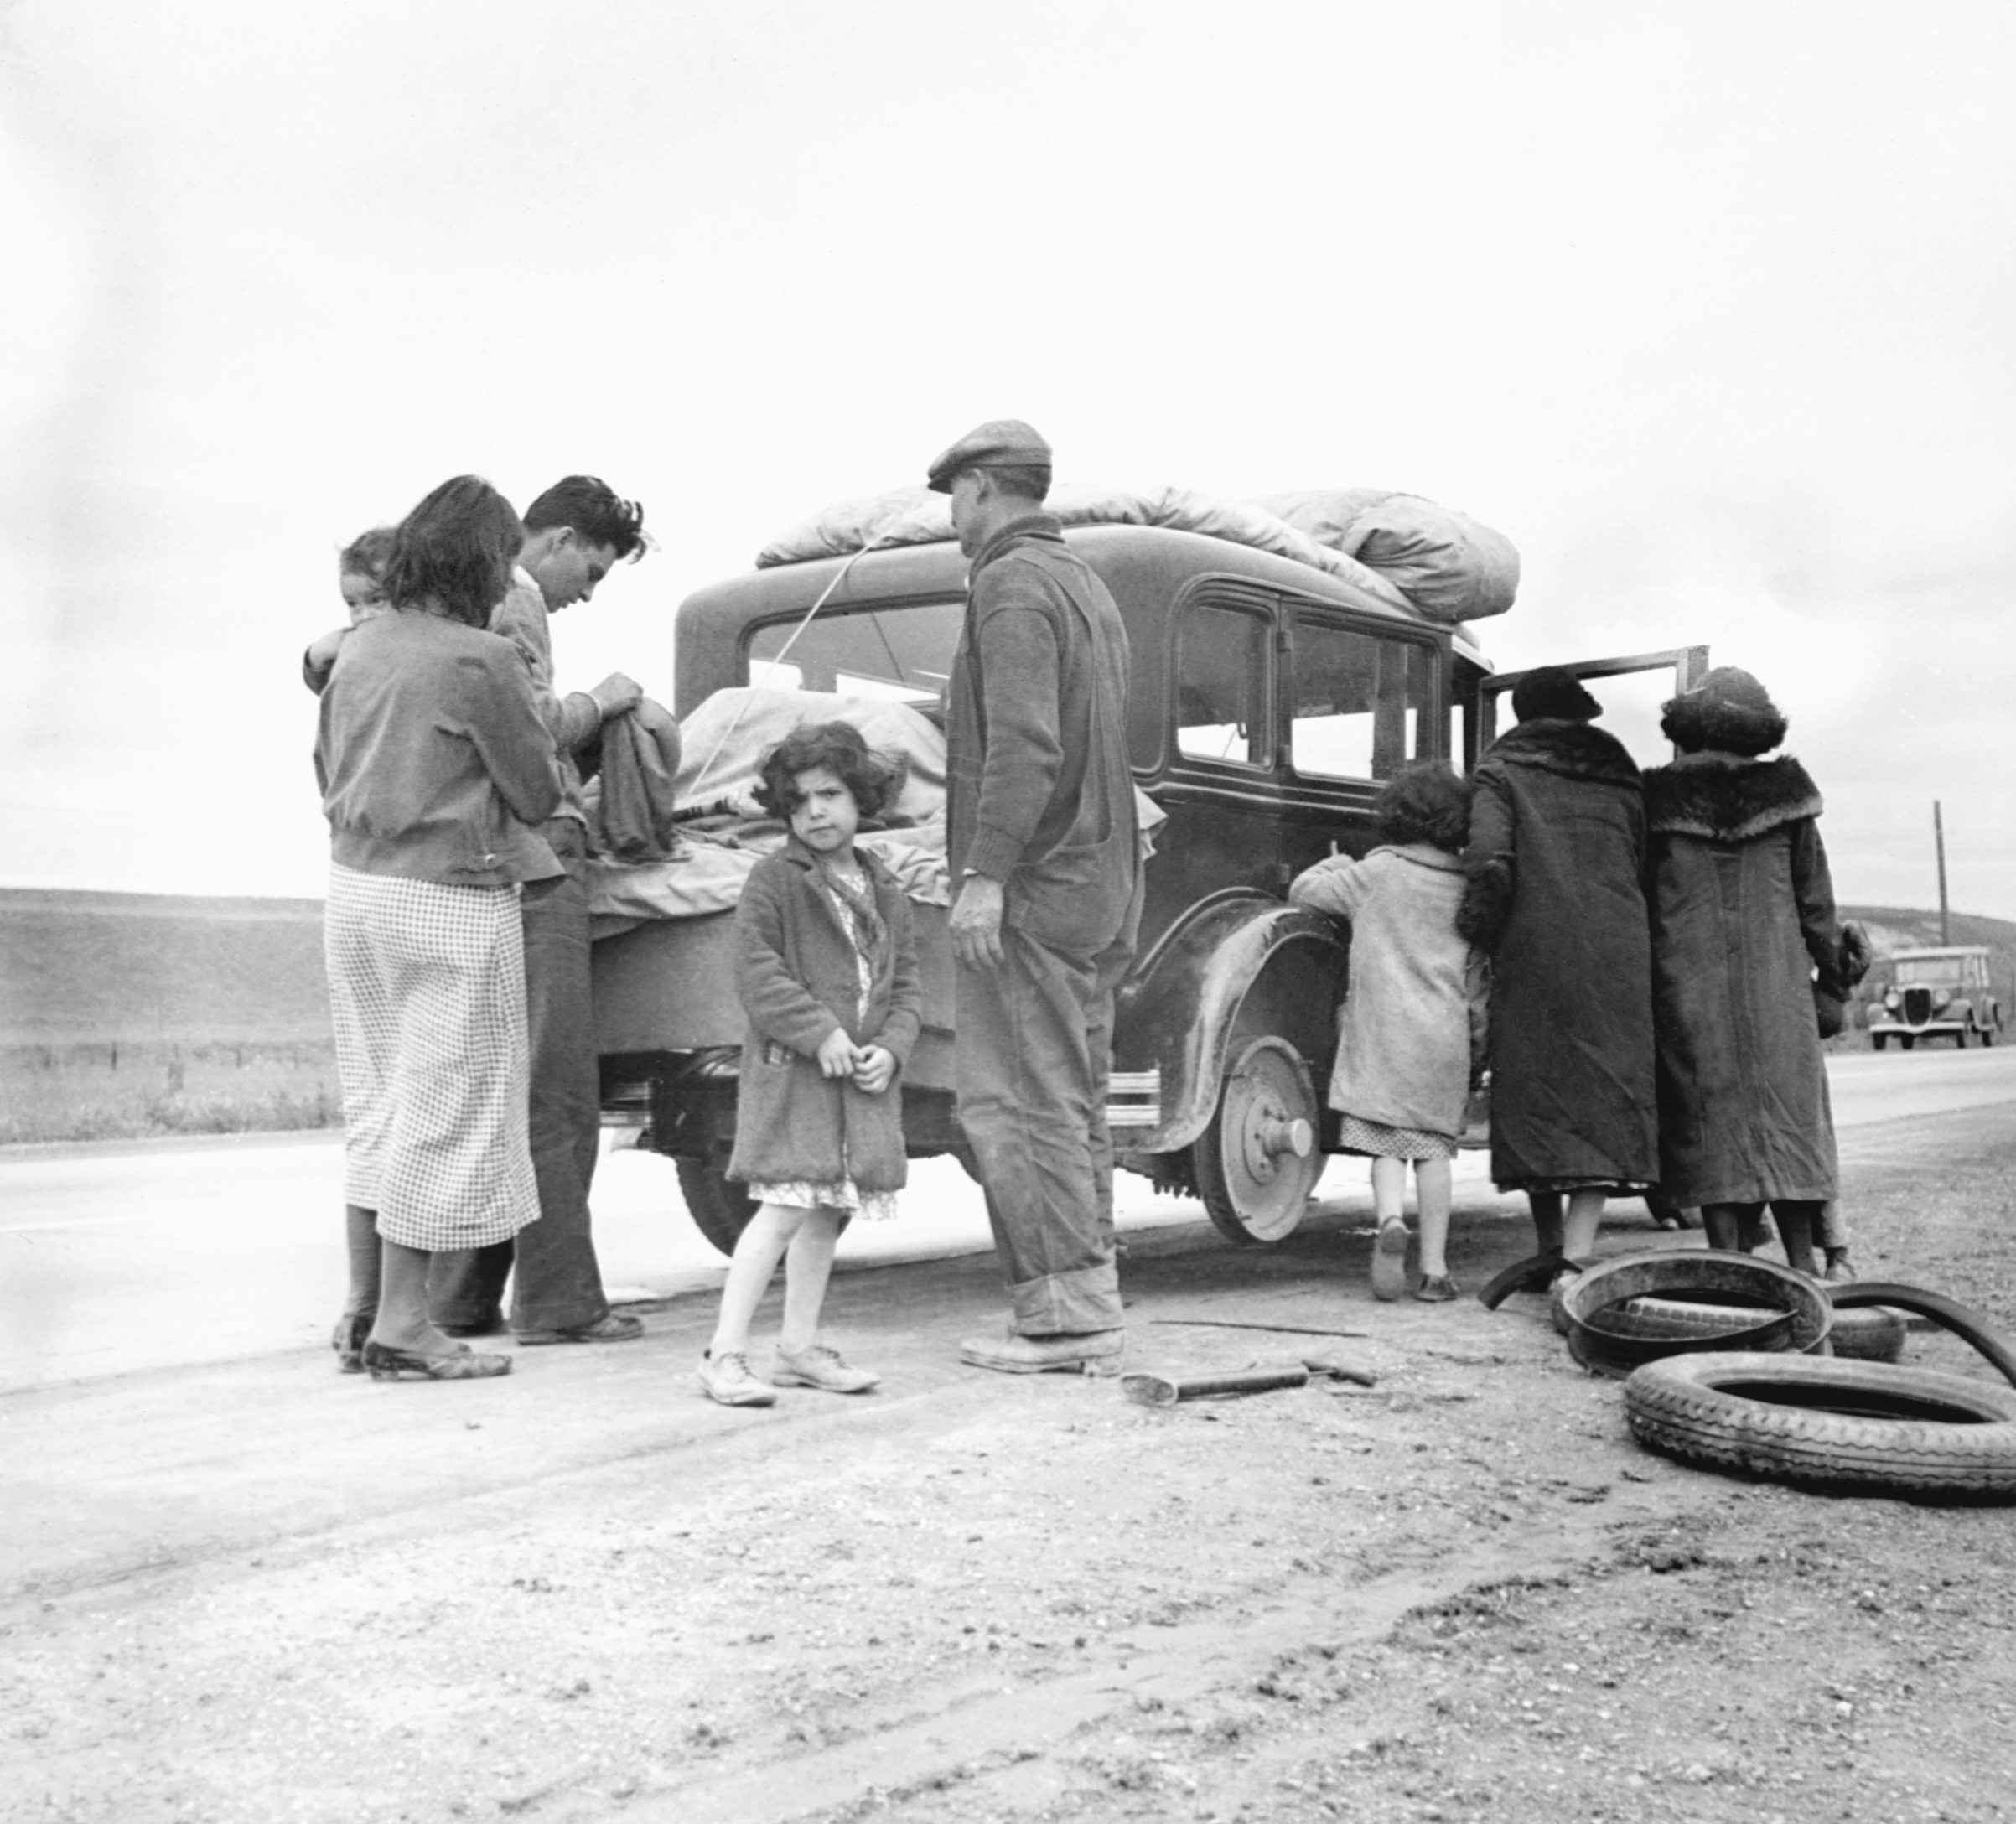 Migrant family from Mexico fixing a tire in California, February 1936. (Corbis via Getty Images)